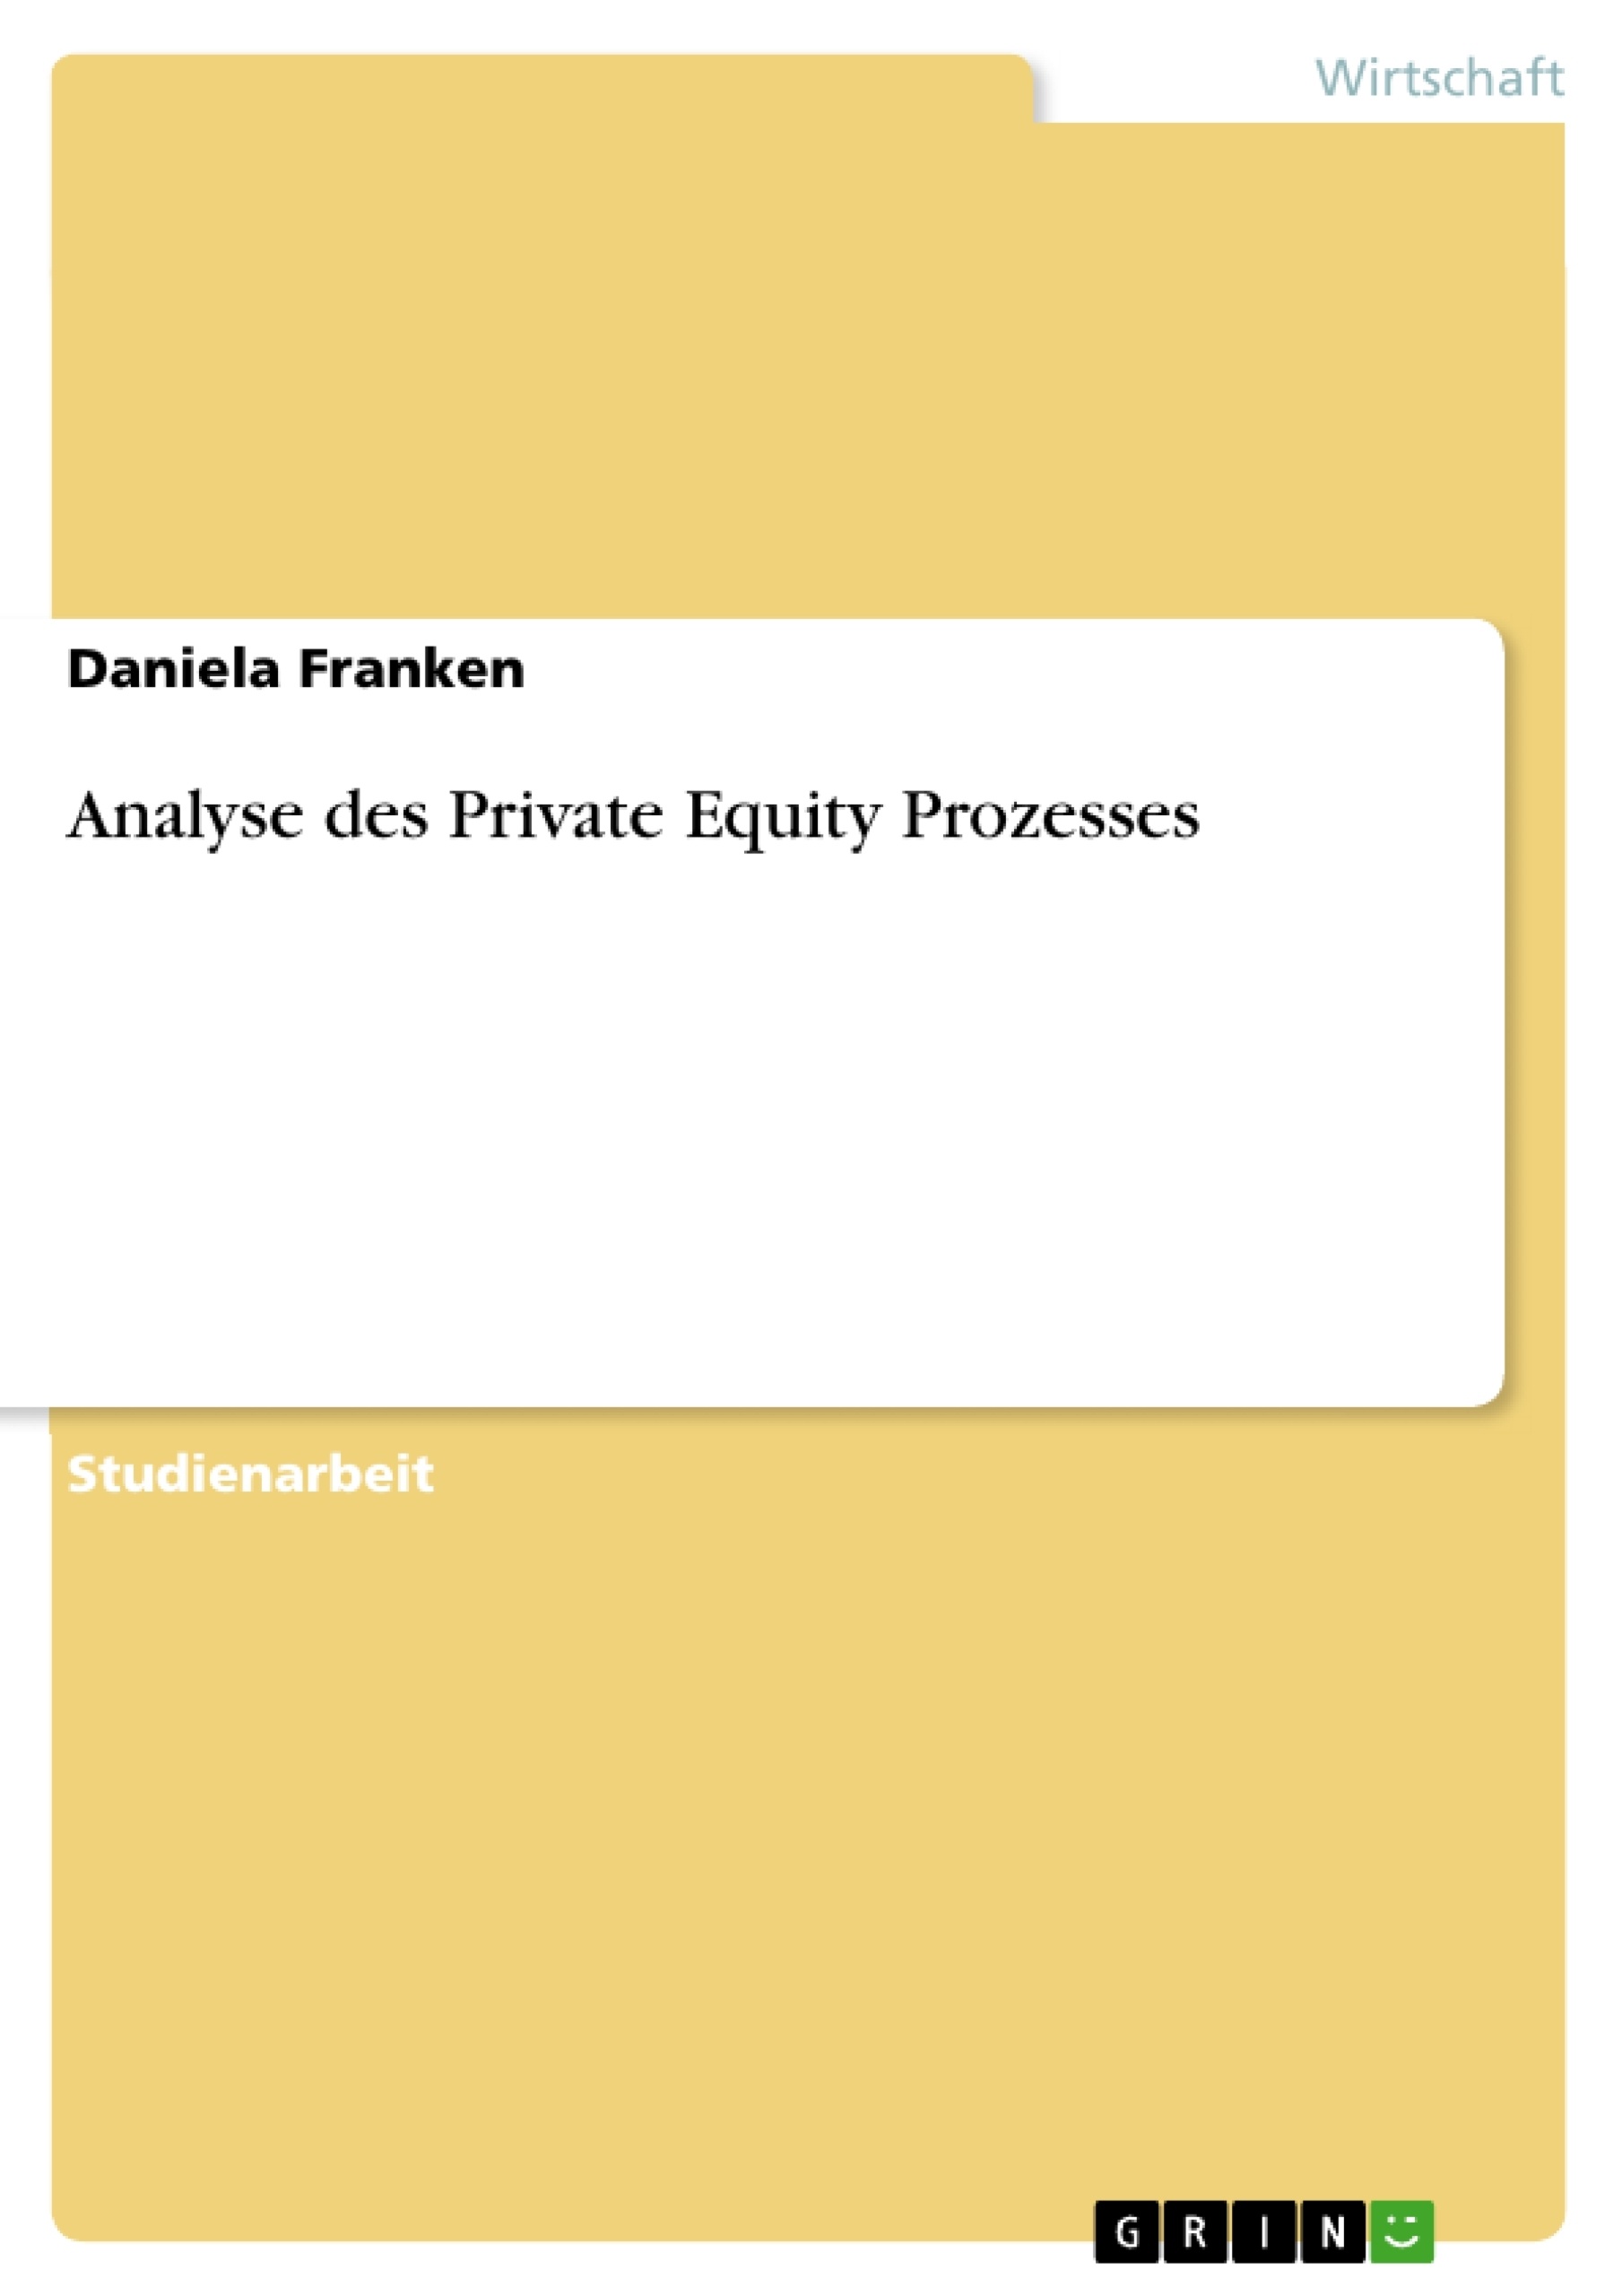 Titre: Analyse des Private Equity Prozesses